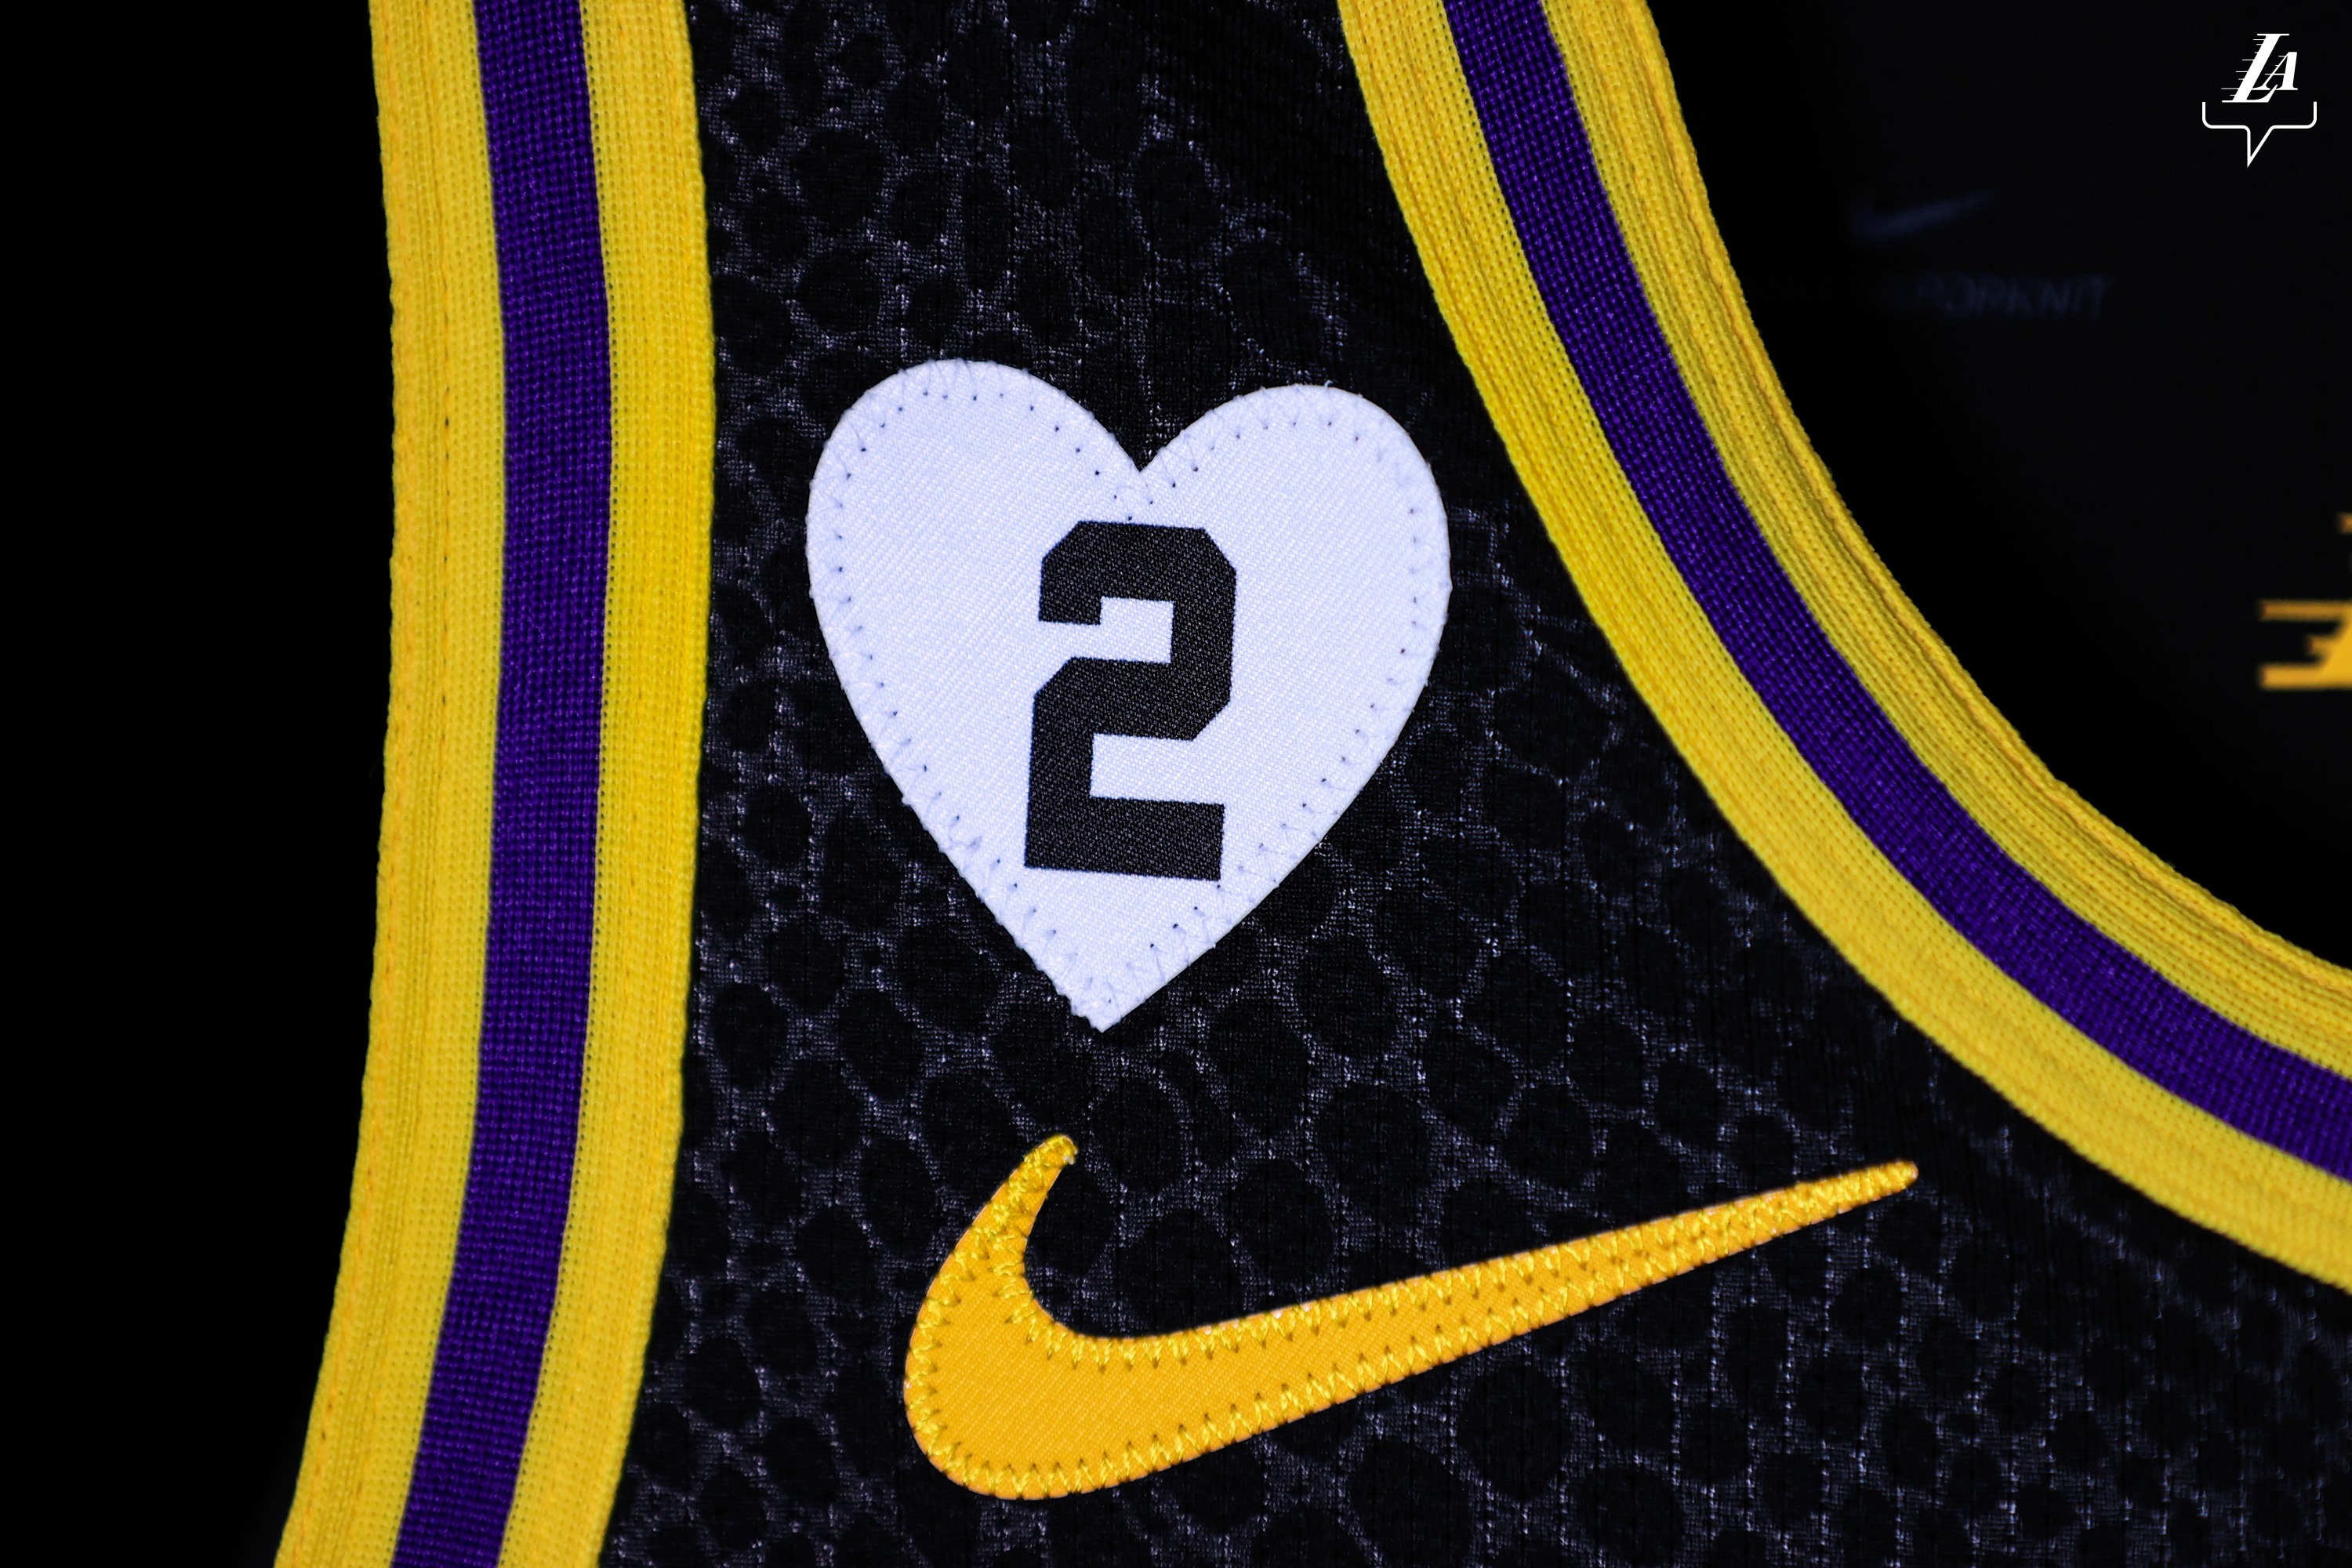 BREAKING: The Los Angeles Lakers are bringing back their Mamba Edition  Jerseys for the 23-24 season. Expect an announcement in the coming…